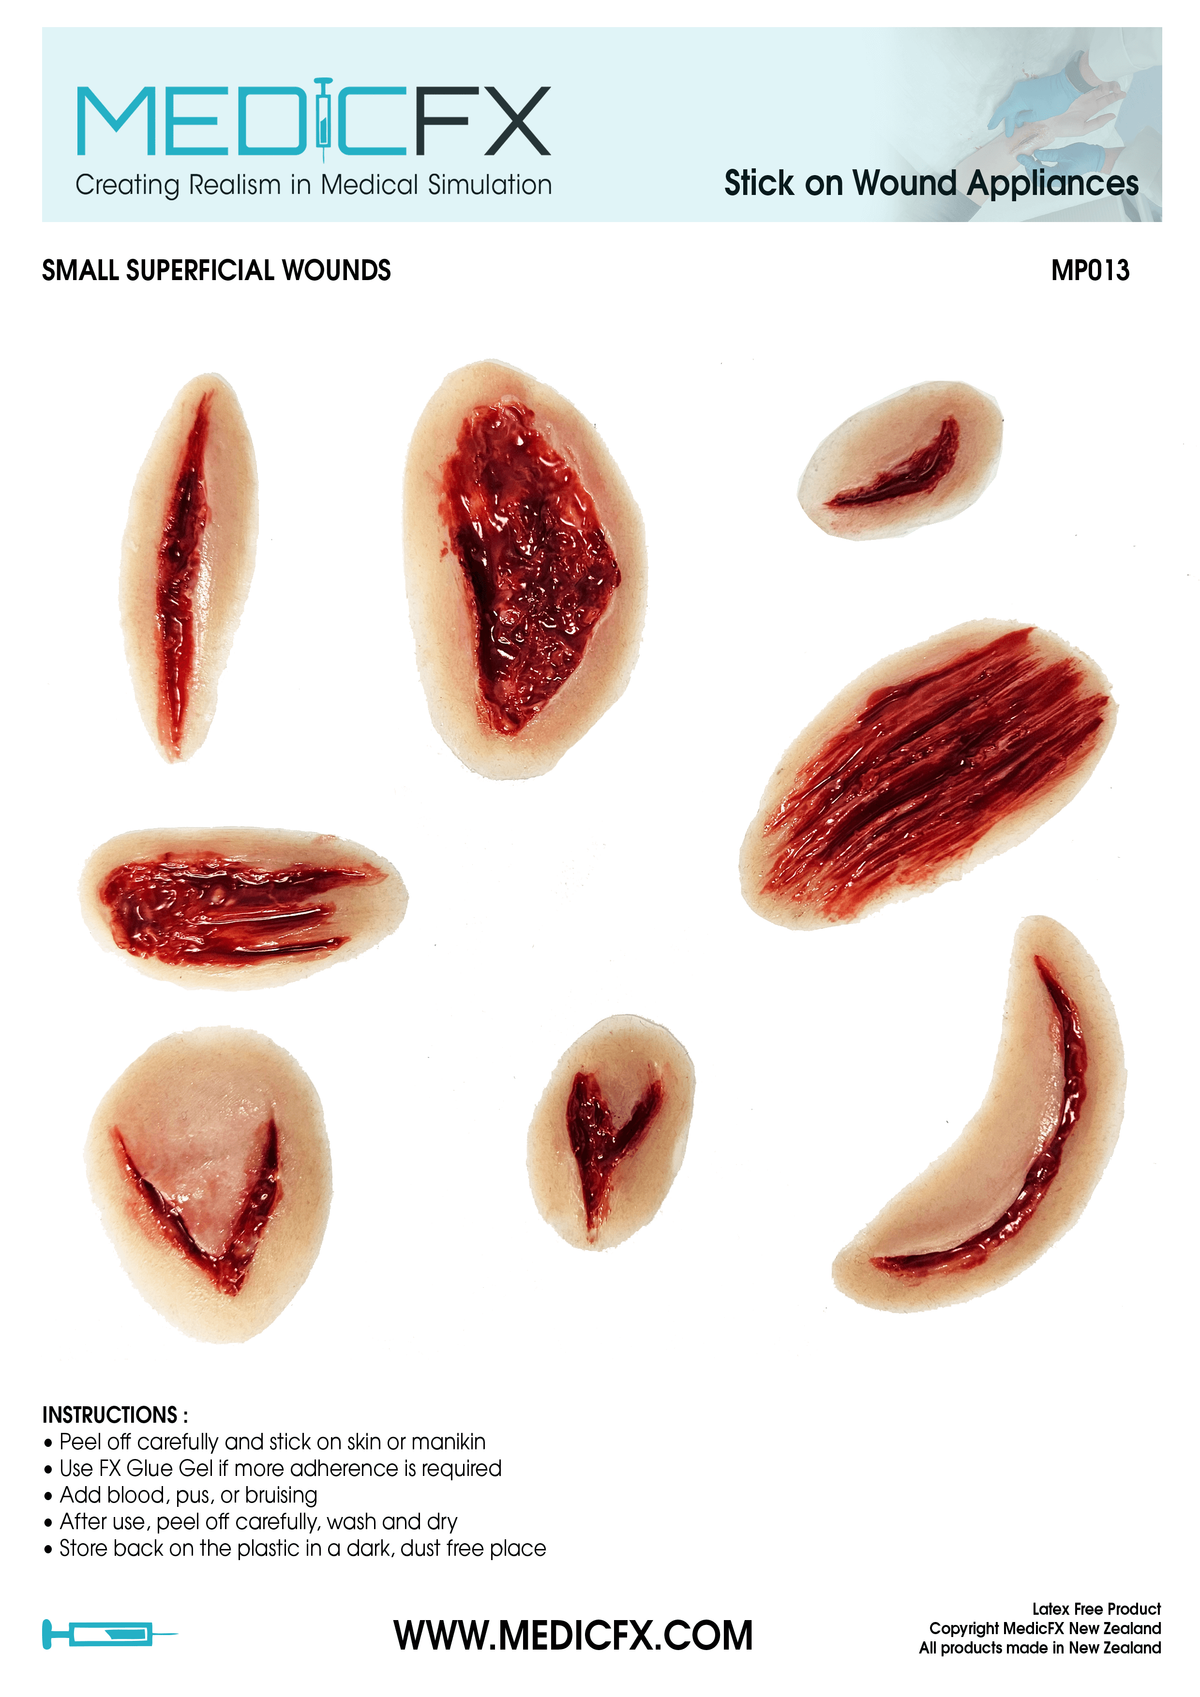 MP013 Sheet Small Superficial Wounds